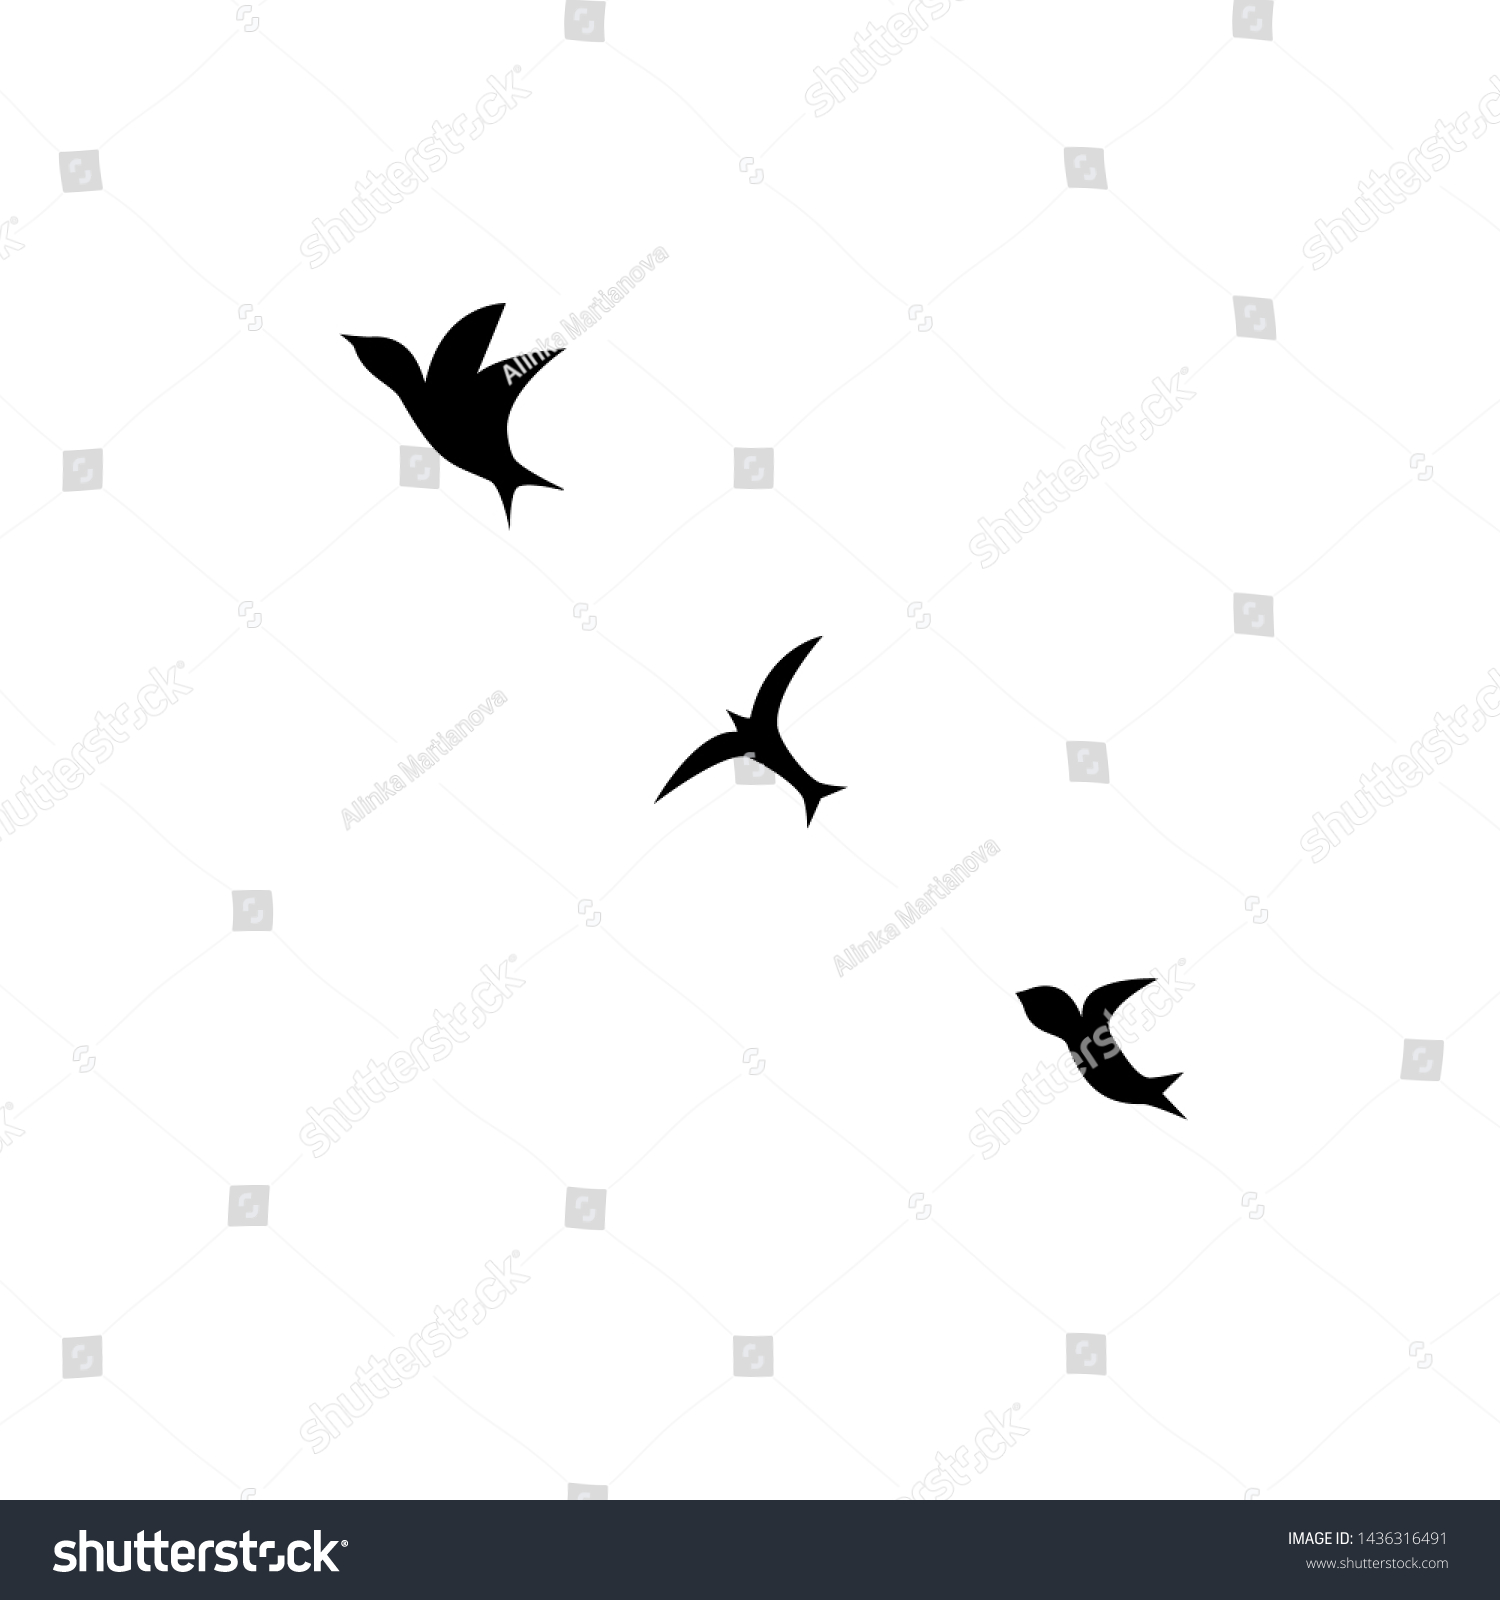 Flock Birds Flying Black Swallows On Stock Vector Royalty Free 1436316491,How To Cut A Dragon Fruit Video